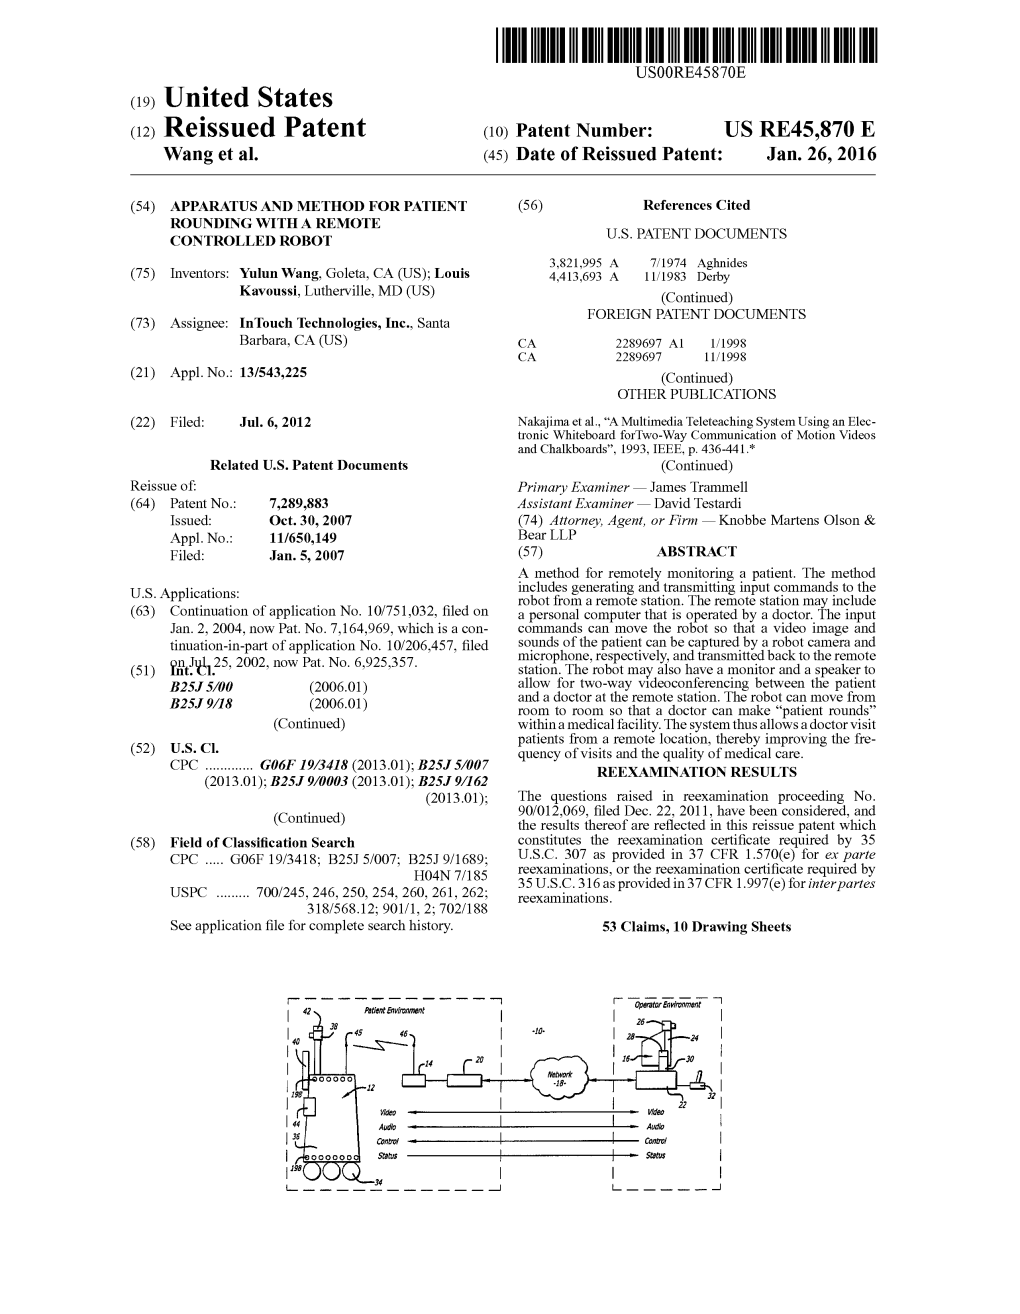 (19) United States (12) Reissued Patent (10) Patent Number: US RE45,870 E Wang Et Al